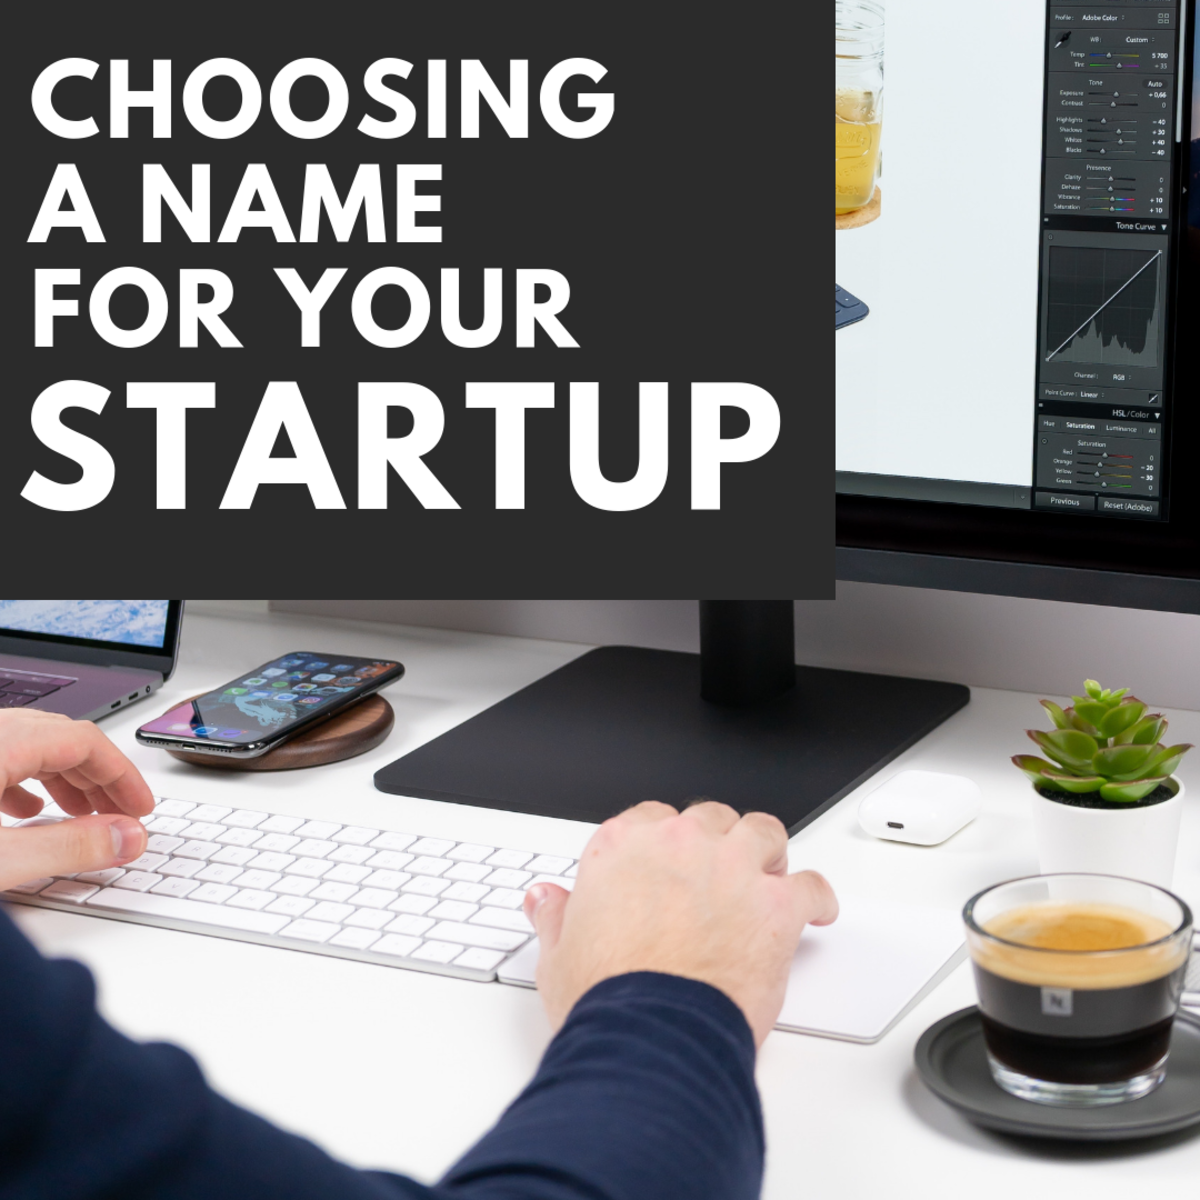 200+ Best Name Ideas for Startups and Tech Companies (and Name Generator)